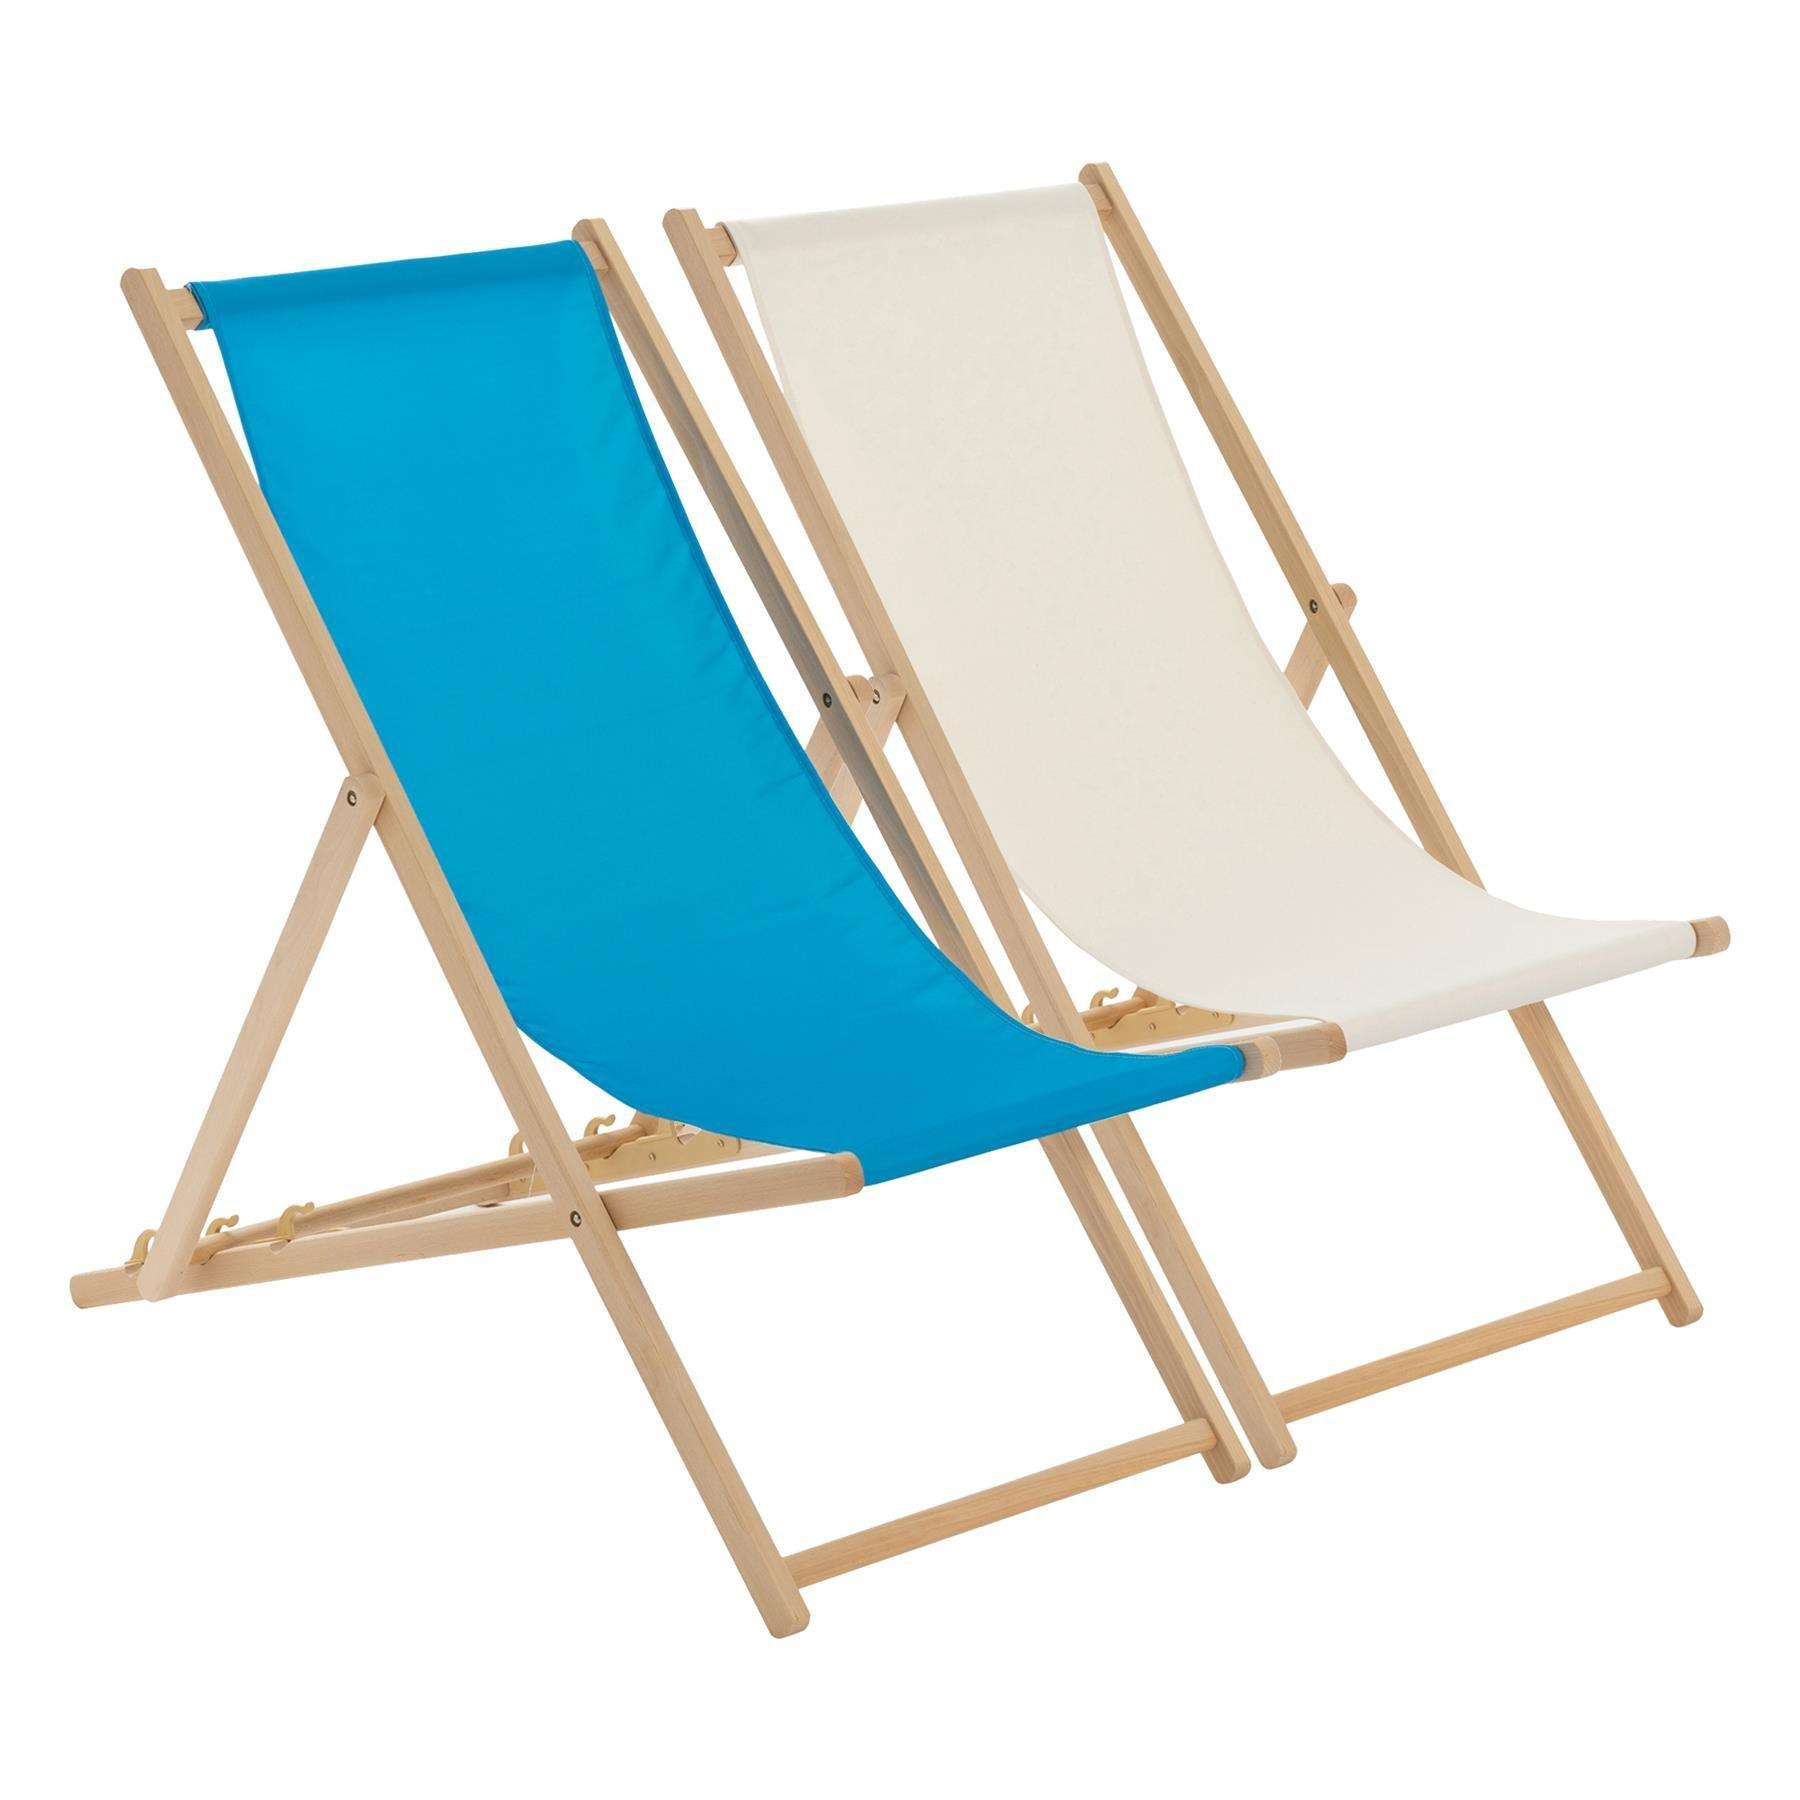 Folding Wooden Deck Chairs Light Blue/Natural Pack of 2 - image 1